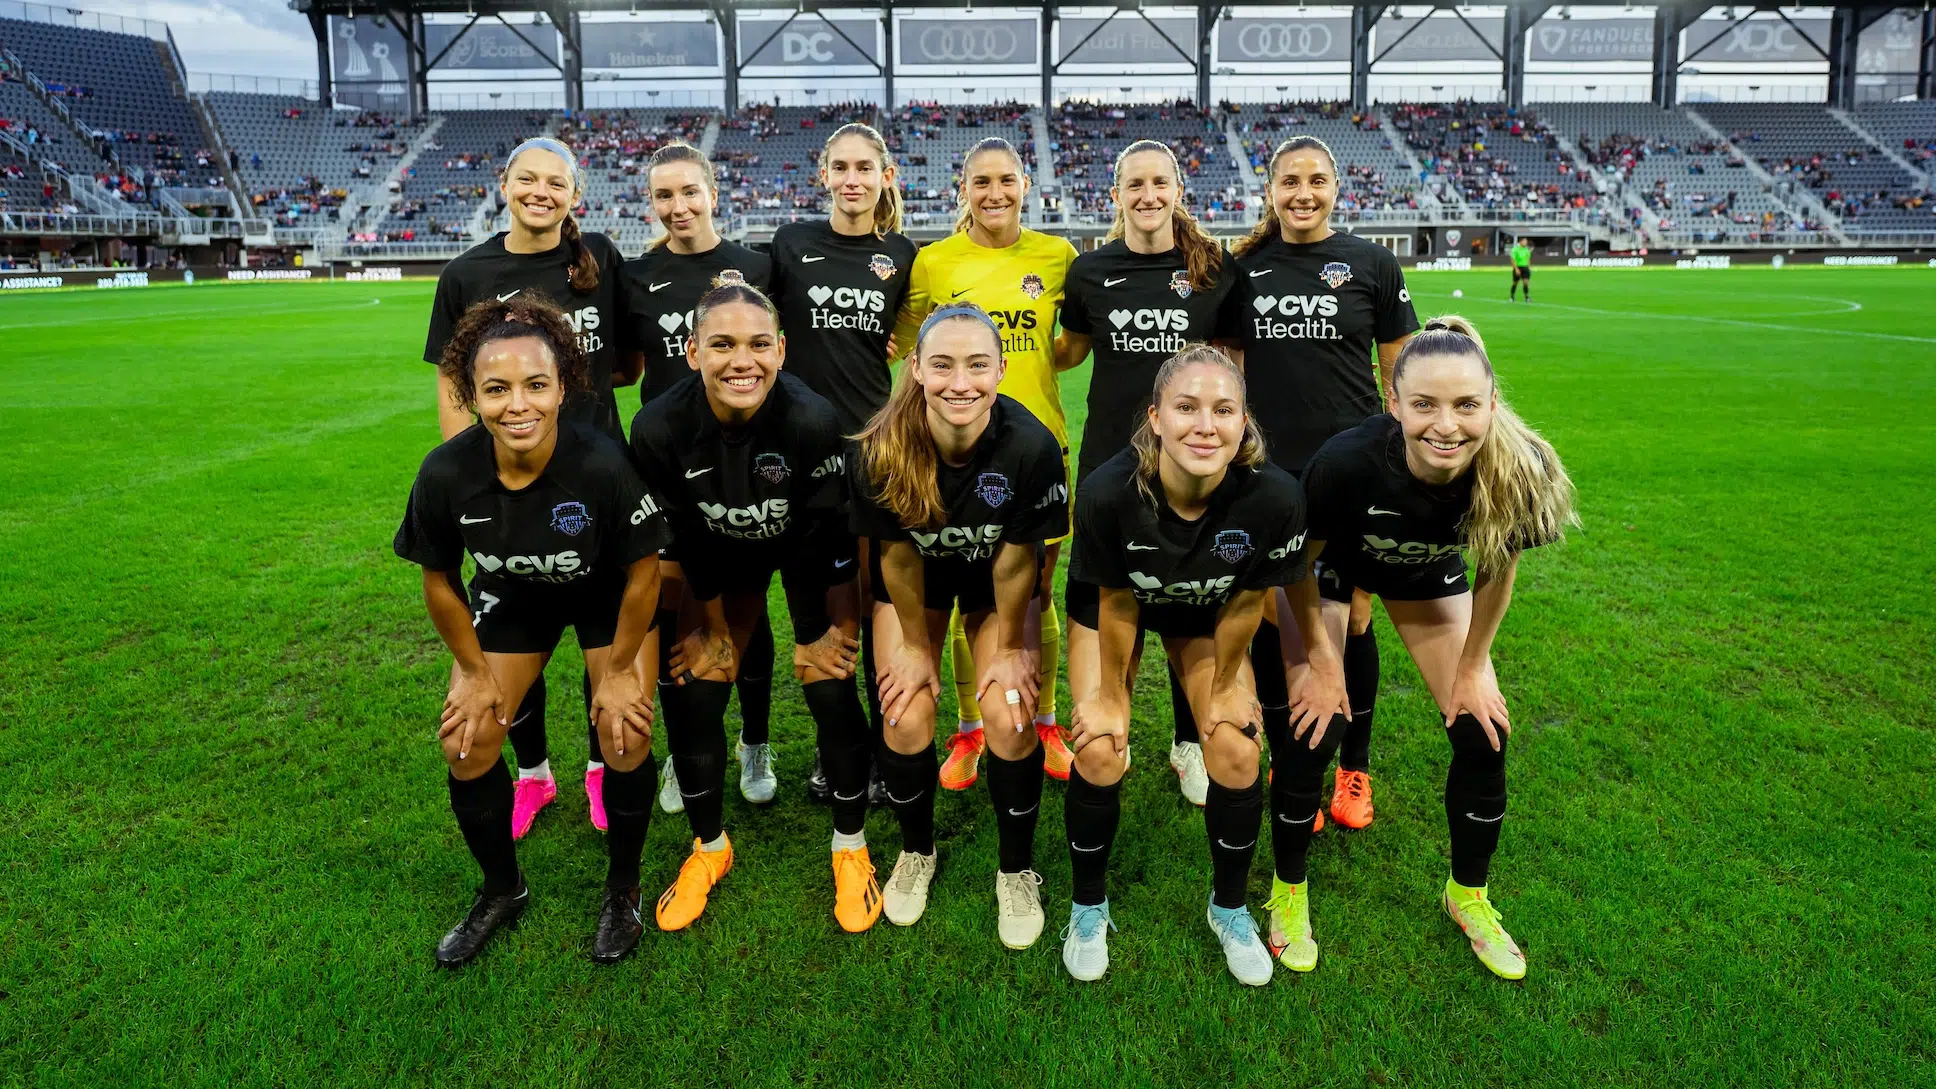 10 soccer players in all black uniforms and one in a yellow goalie uniform pose in two rows for a photo on a soccer field with bleachers in the background.